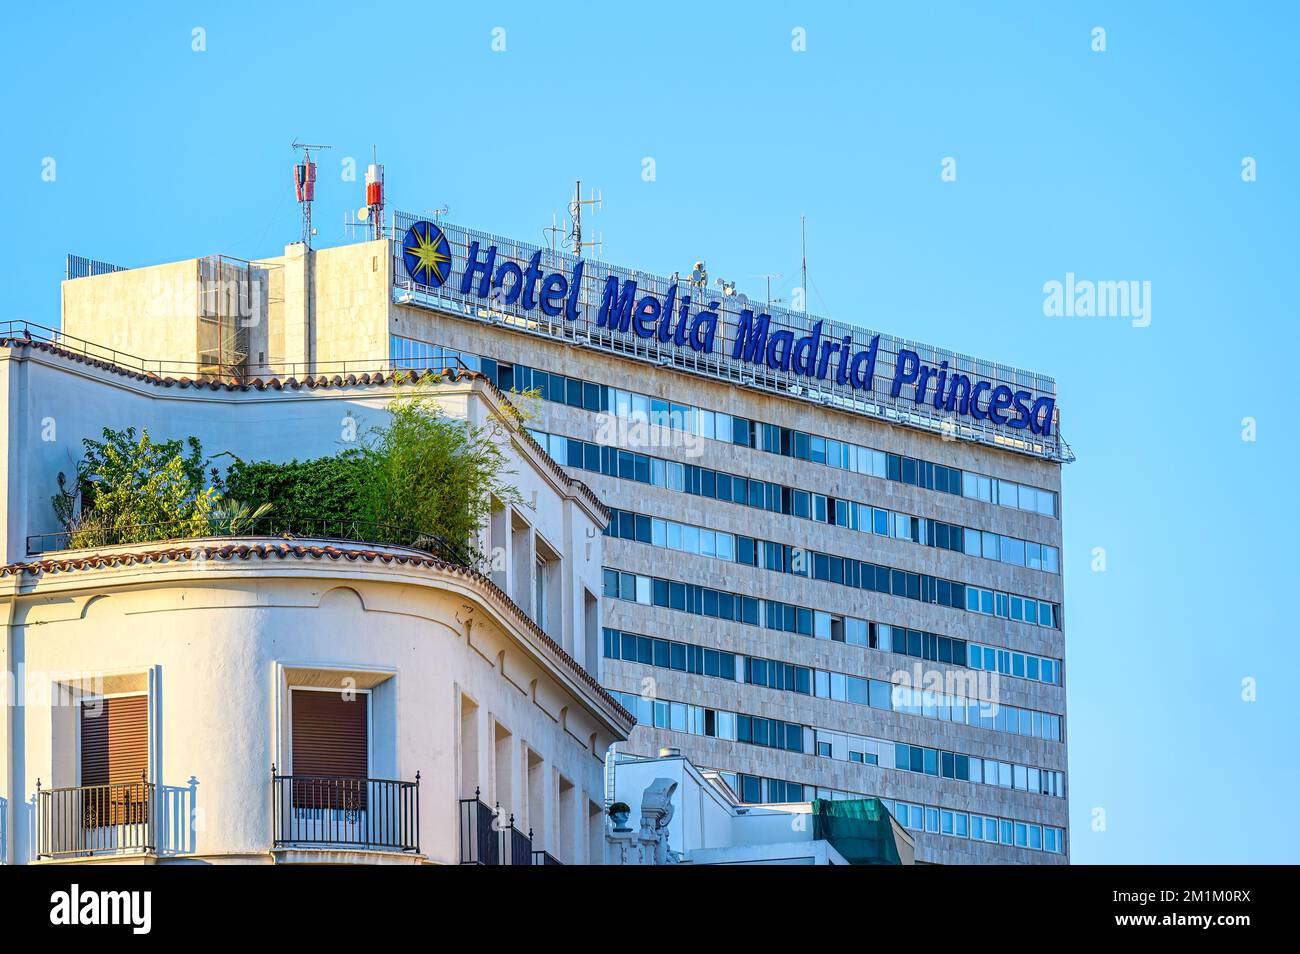 Hotel Melia Madrid Princesa. Exterior building architecture contrasted with an old style structure in the foreground Stock Photo